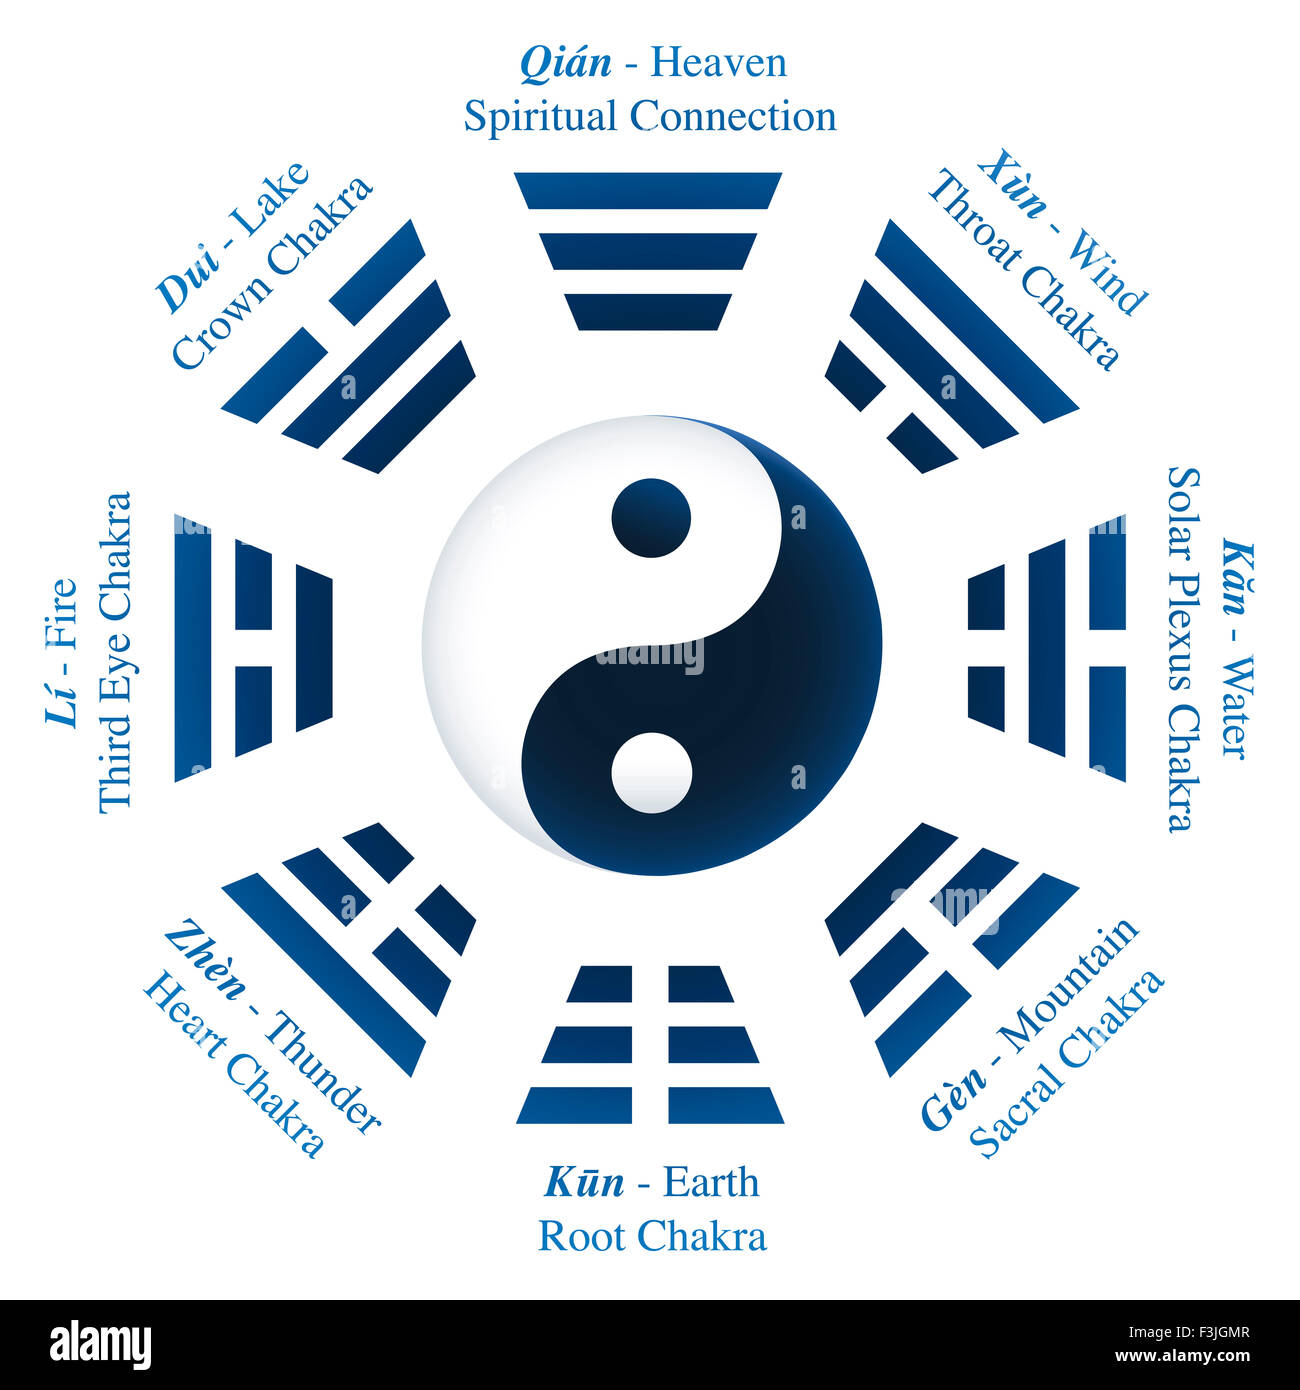 Trigrams or Bagua of I Ching with names and meanings - Yin Yang symbol in the middle. Stock Photo